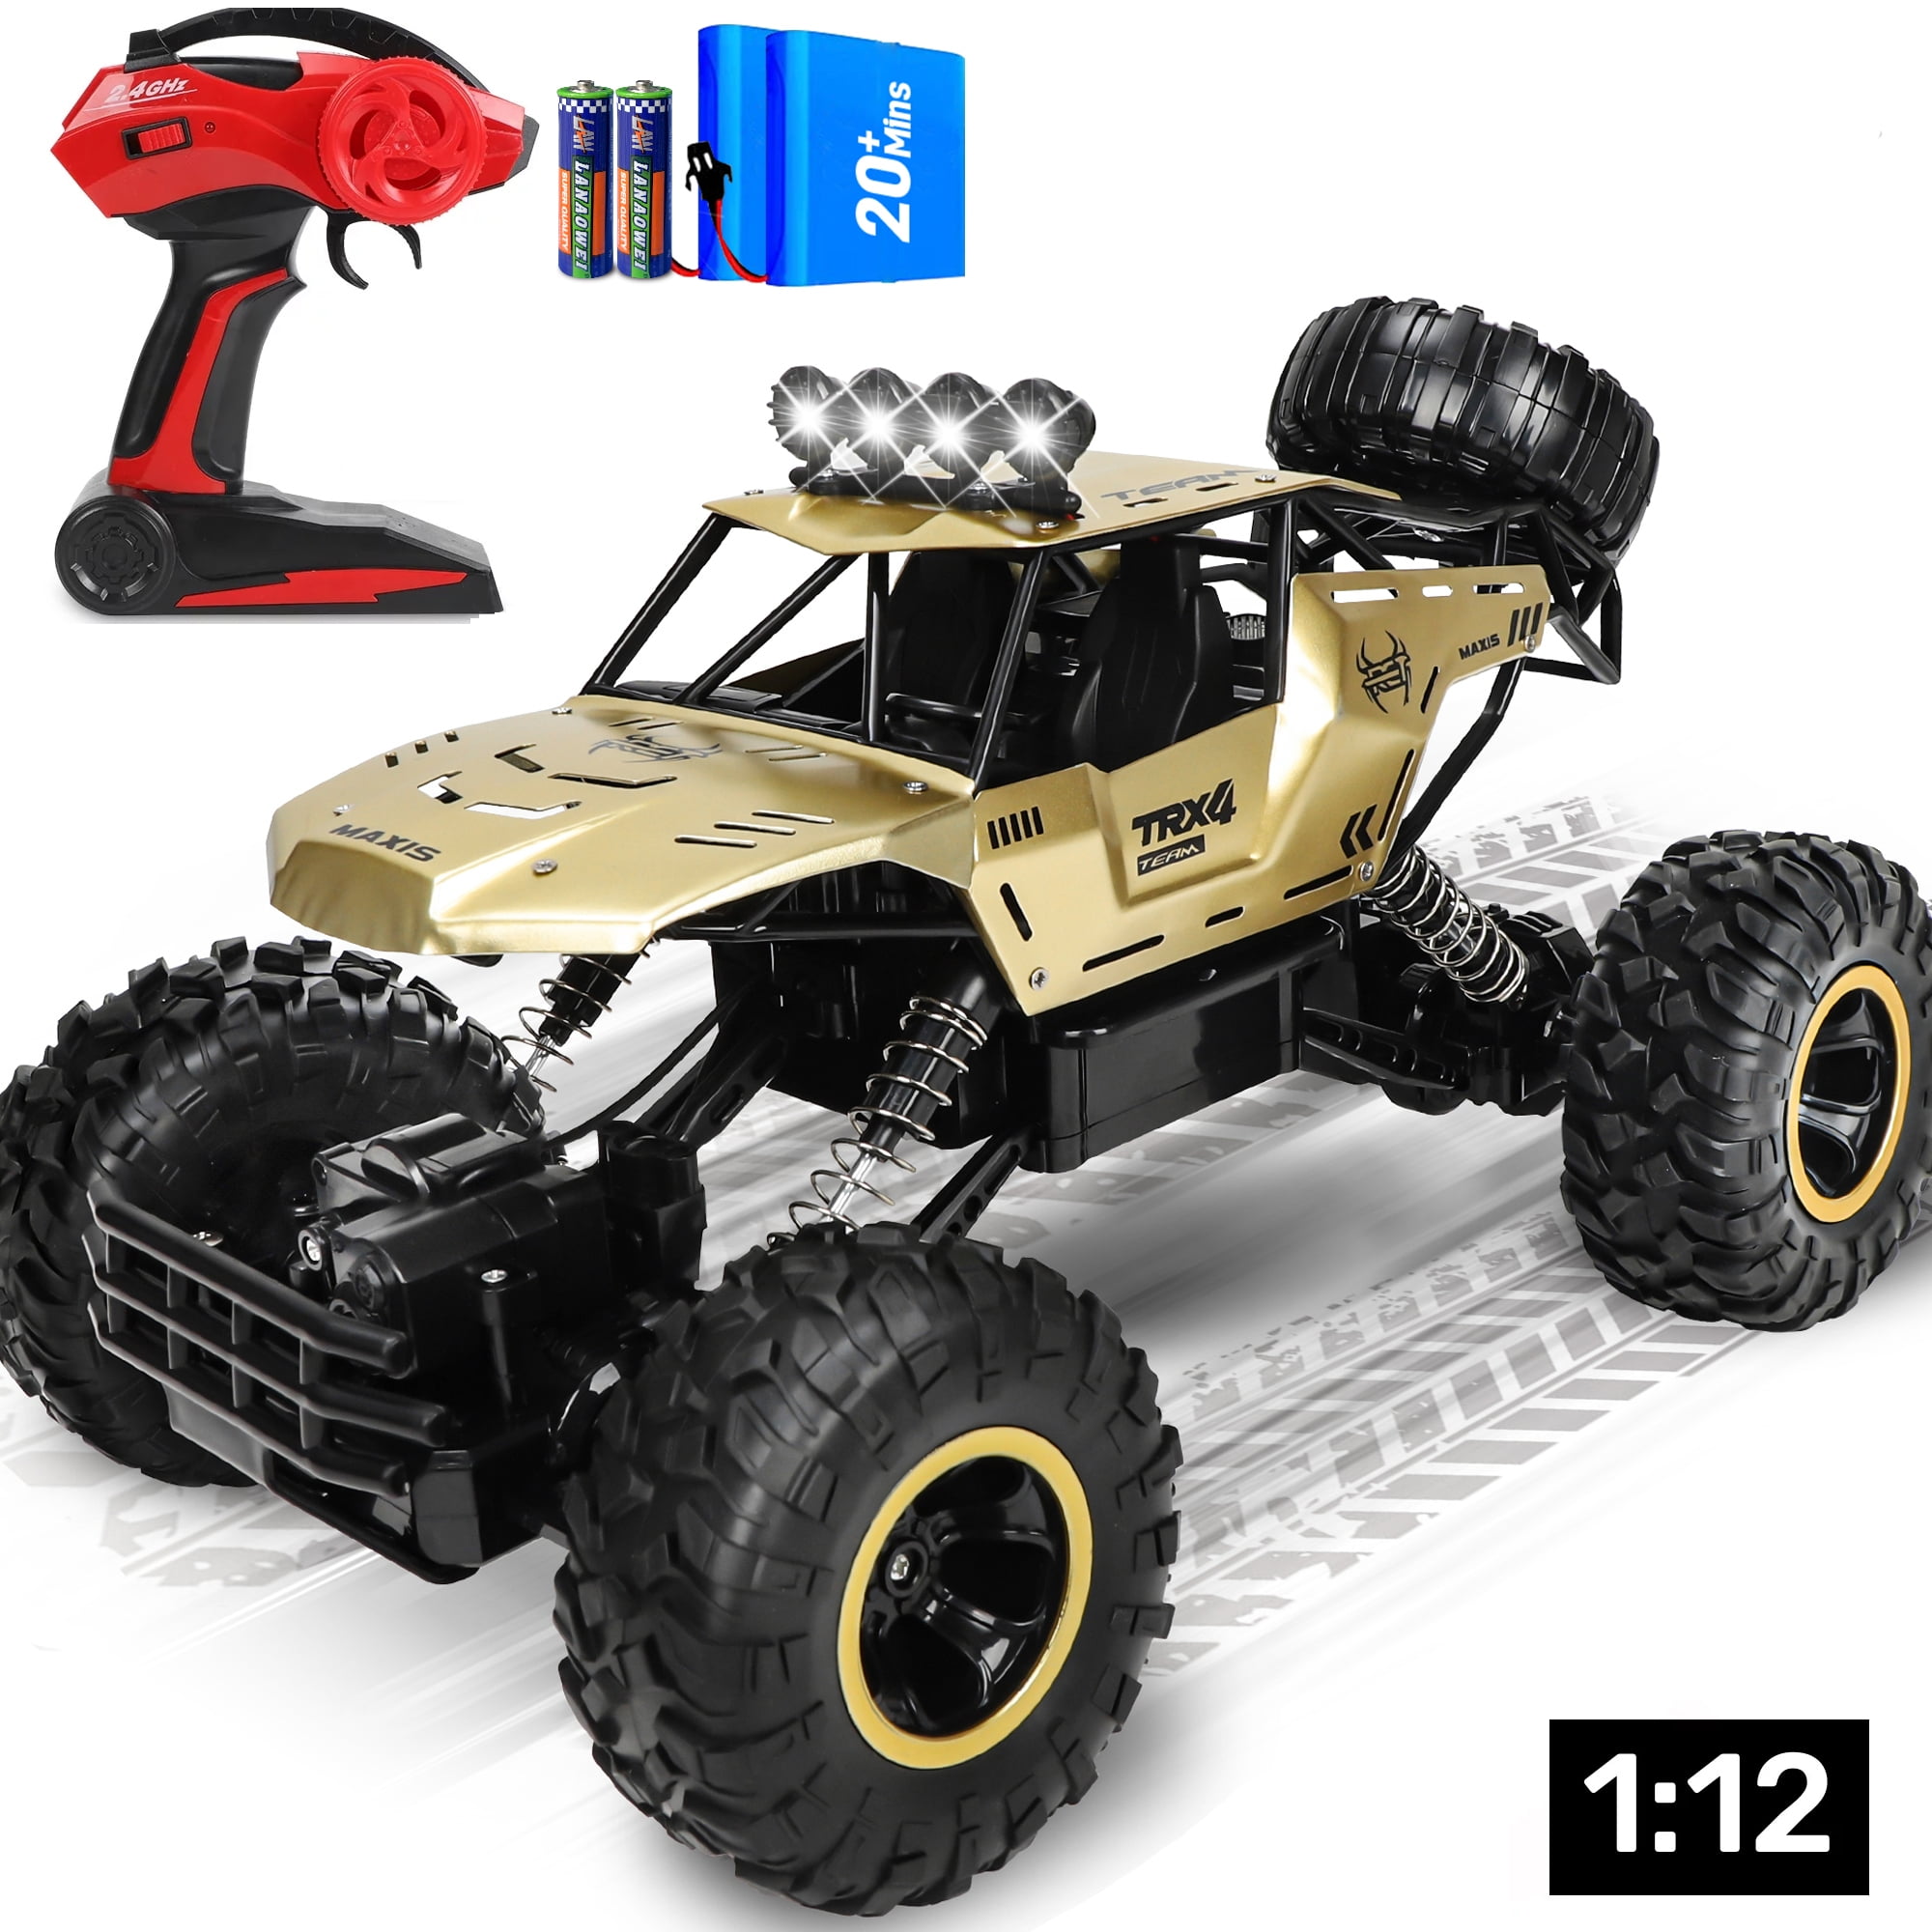 Wisairt Large RC Cars, 1:12 4WD Large Remote Control Monster Truck 2.4 GHz  Alloy RC Cars for Kids Adults Age 6 + Birthday Gifts (Black) 